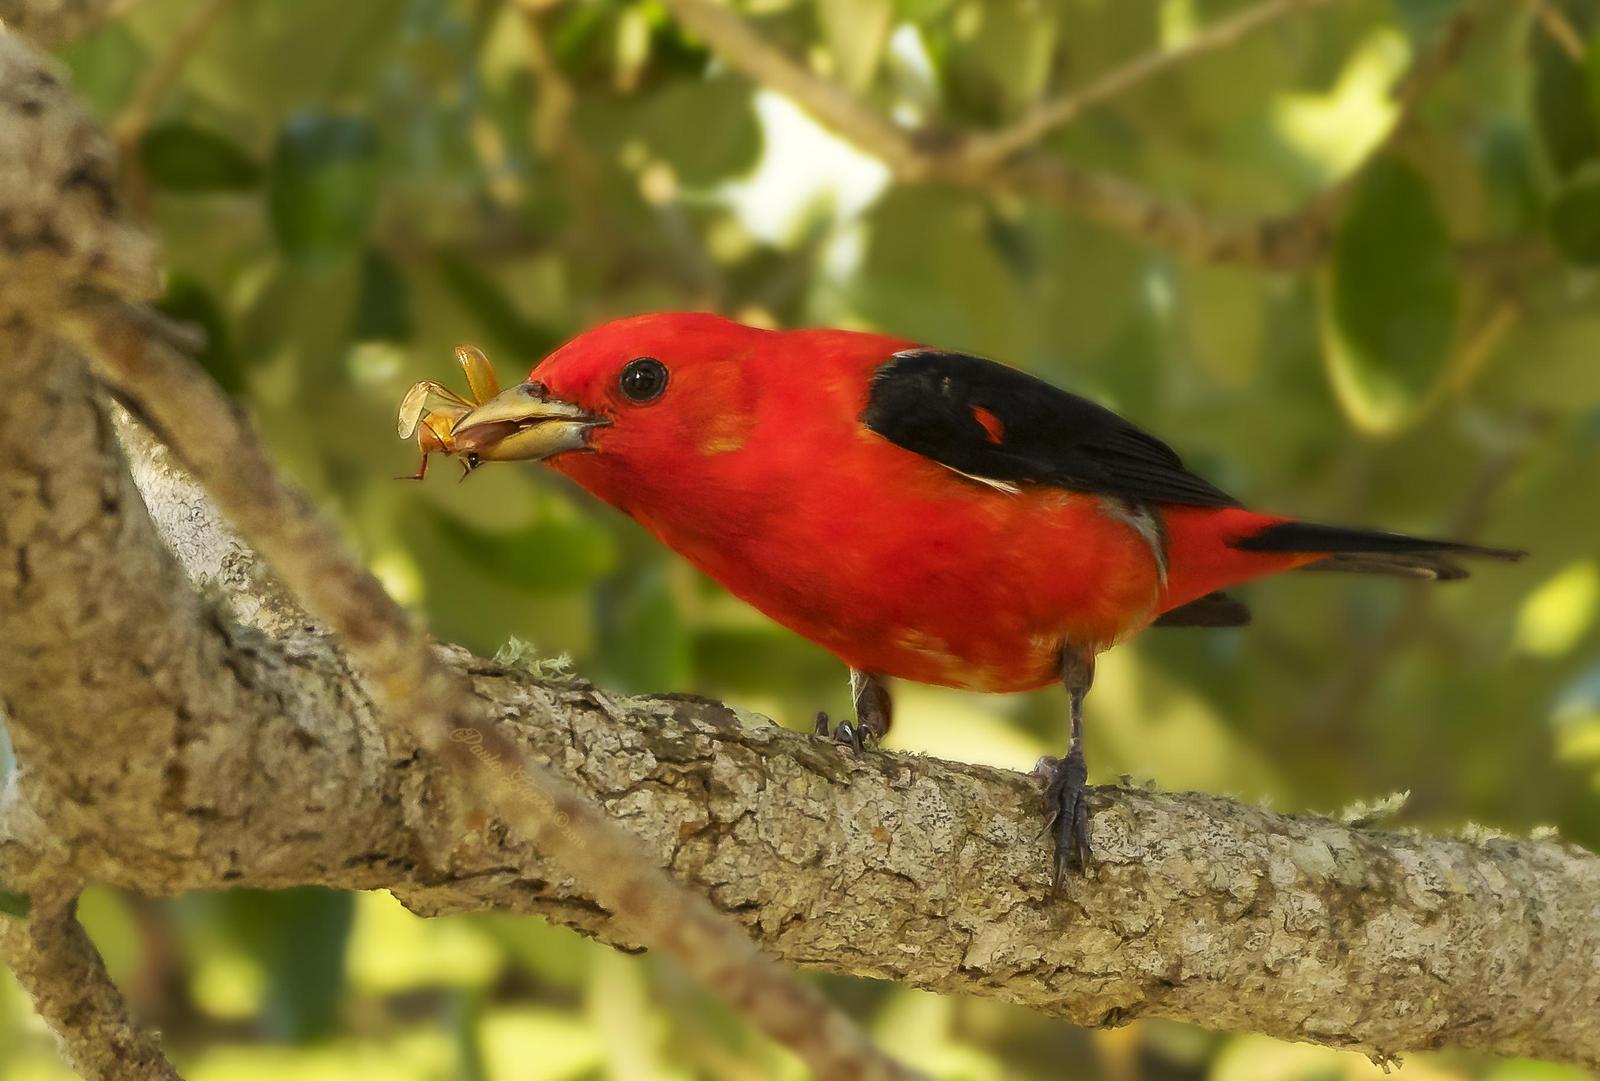 Scarlet Tanager Photo by PAULA LOPES